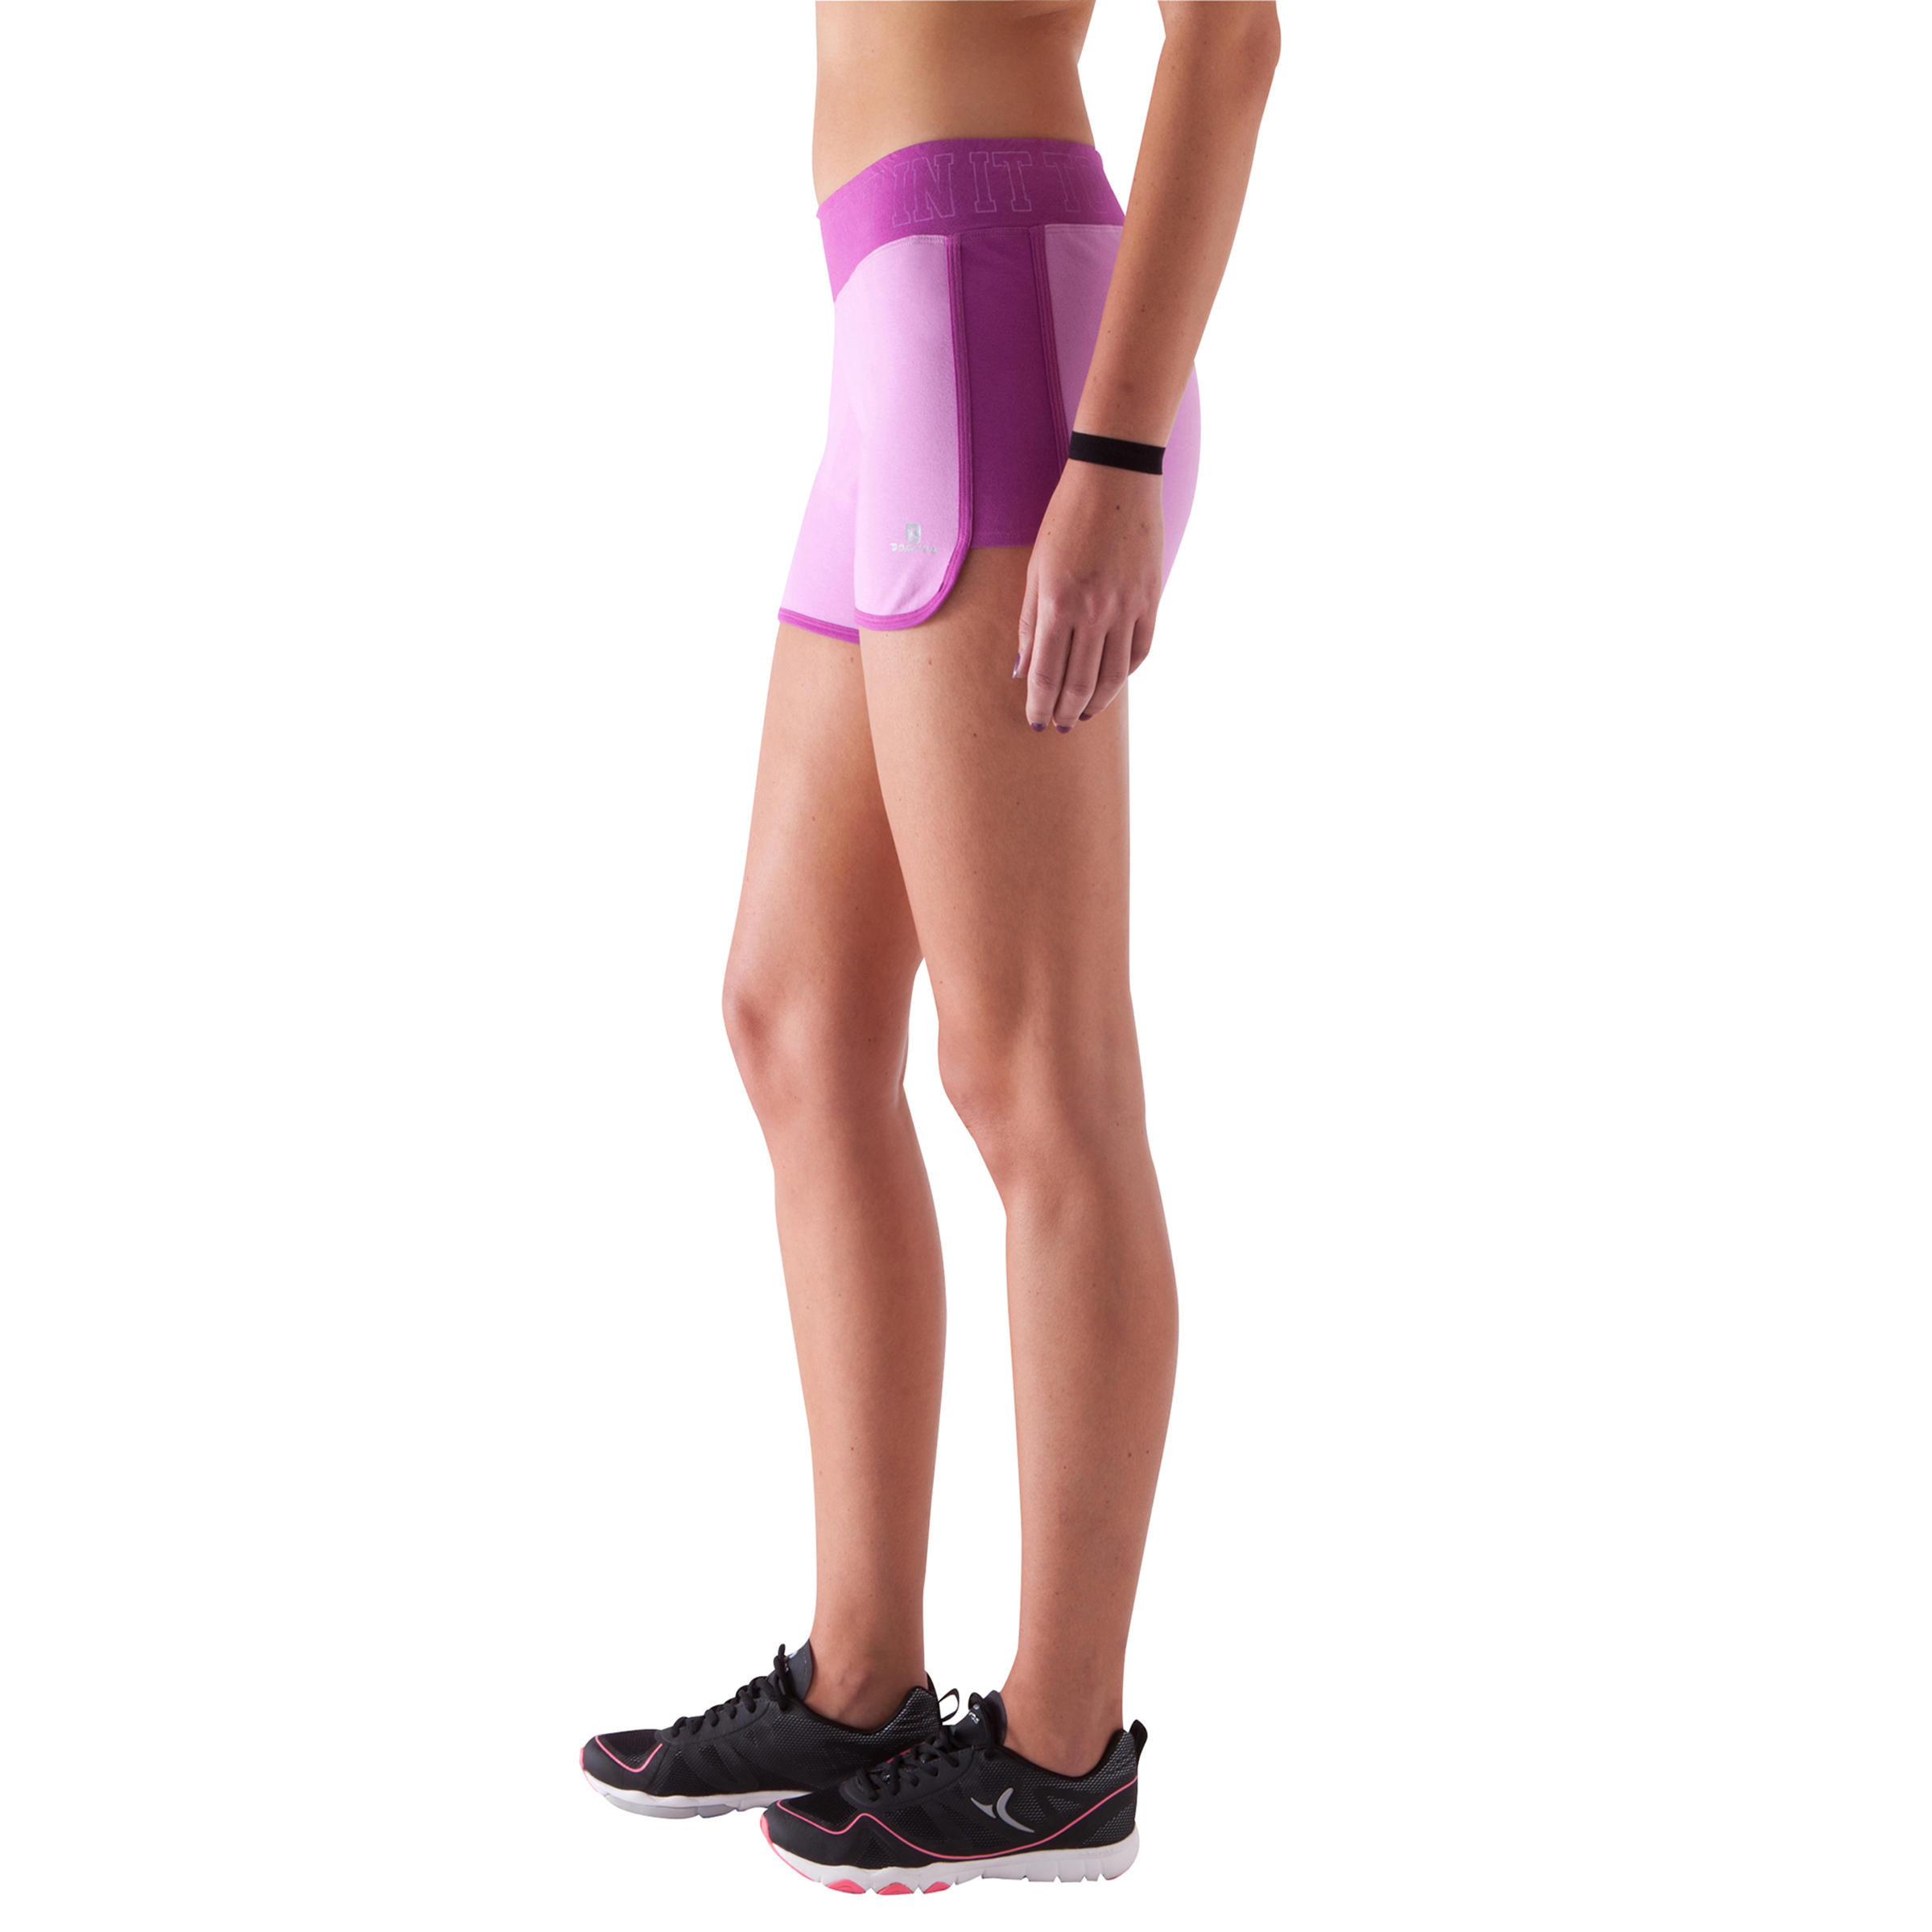 Women's Fitness Shorts with Contrasting Print Waistband - Mauve/Dark Pink 5/11